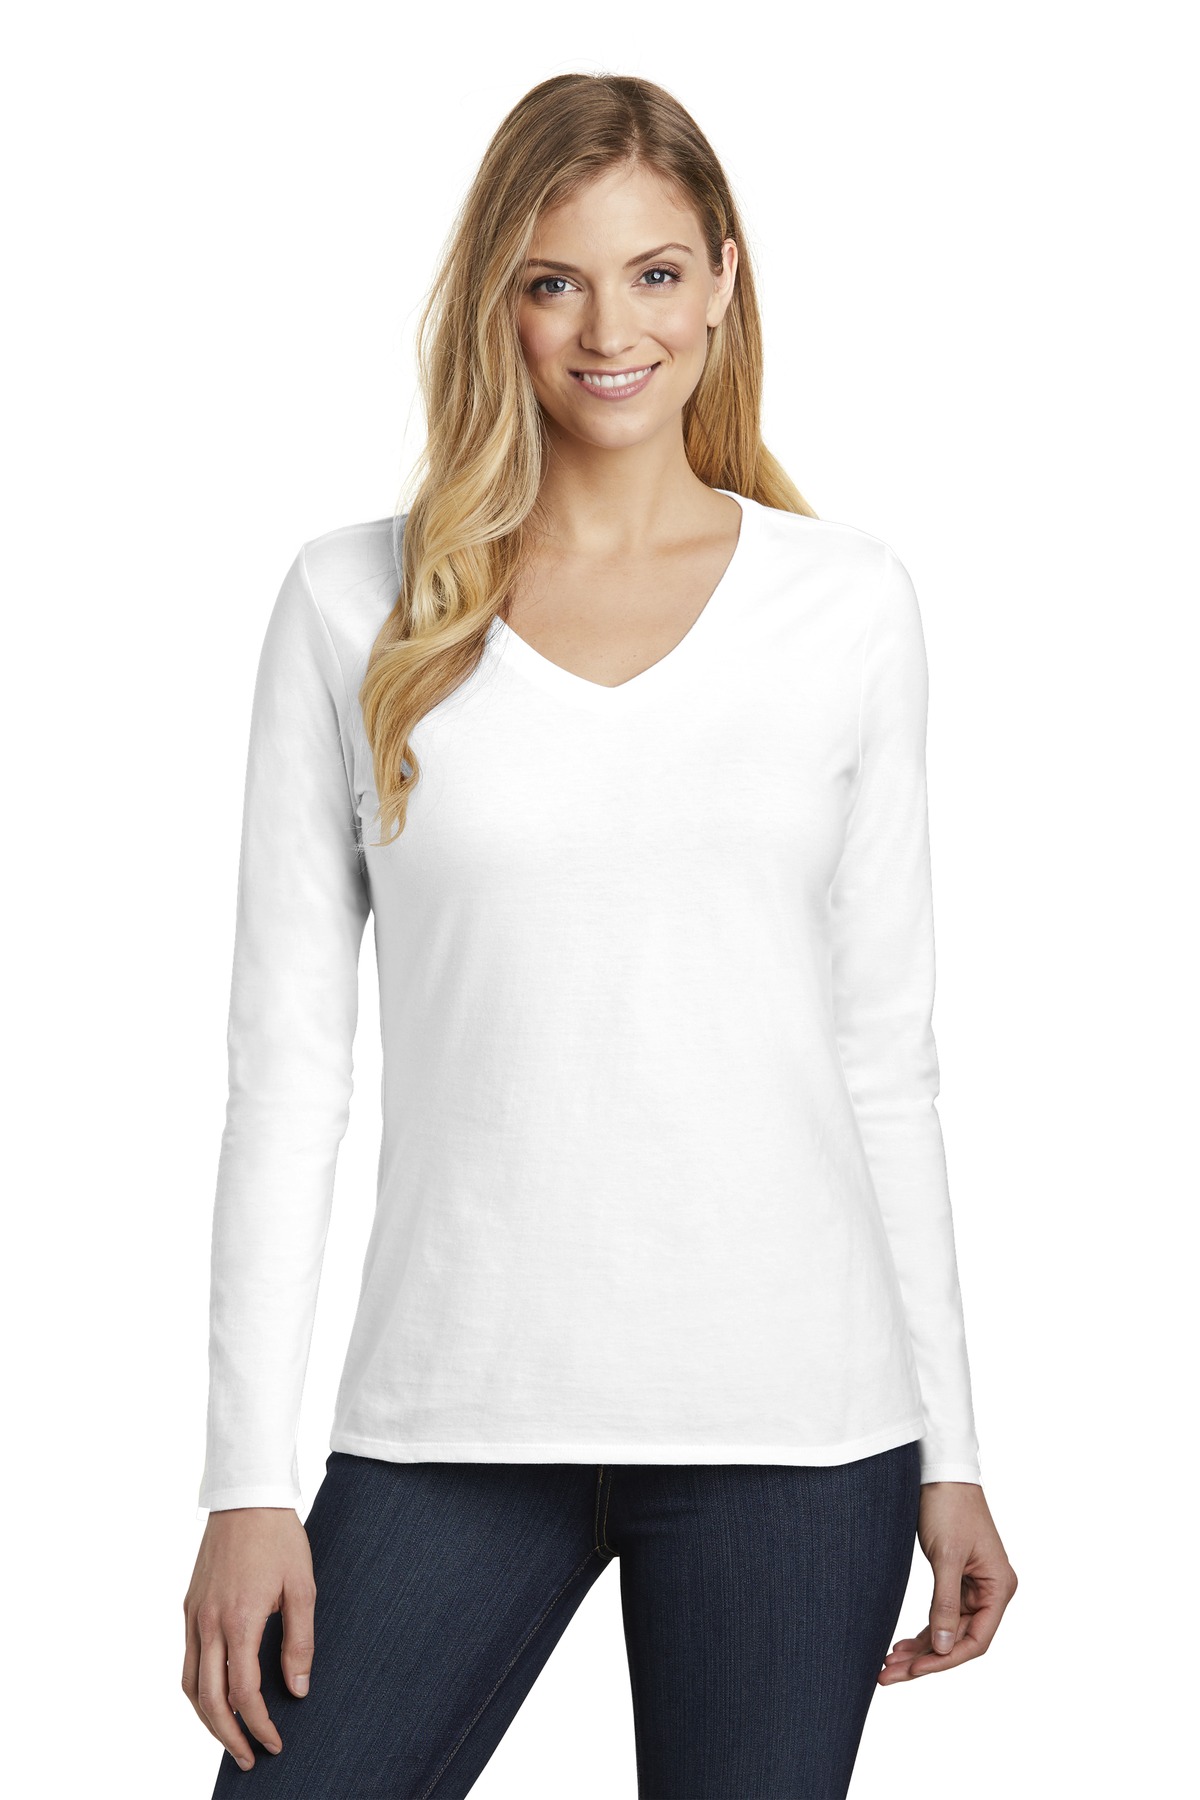 District Women''s Very Important Tee Long Sleeve V-Neck. DT6201